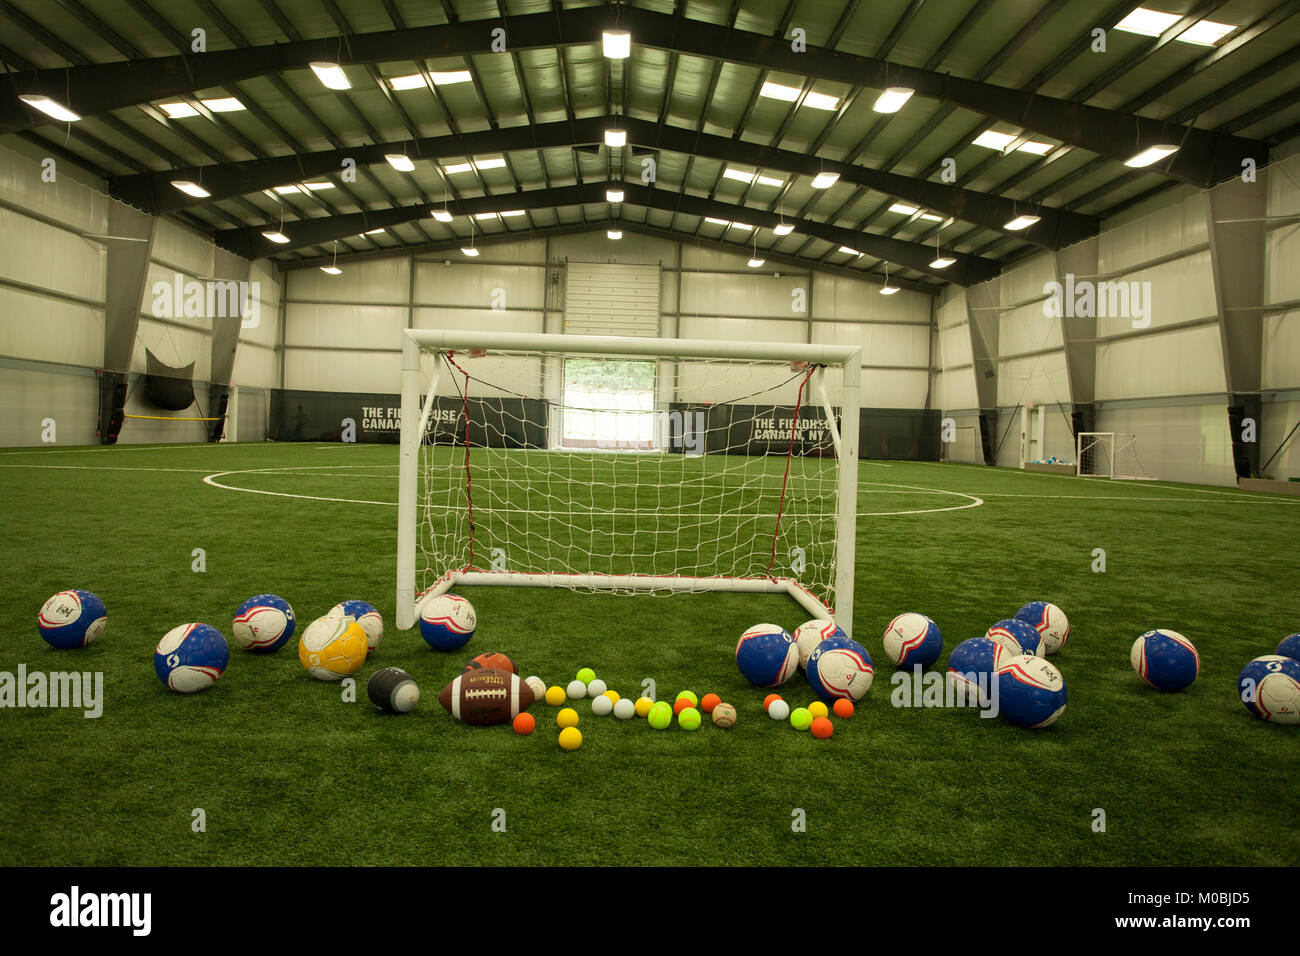 An indoor sports field rented out for practicing various sports. Stock Photo